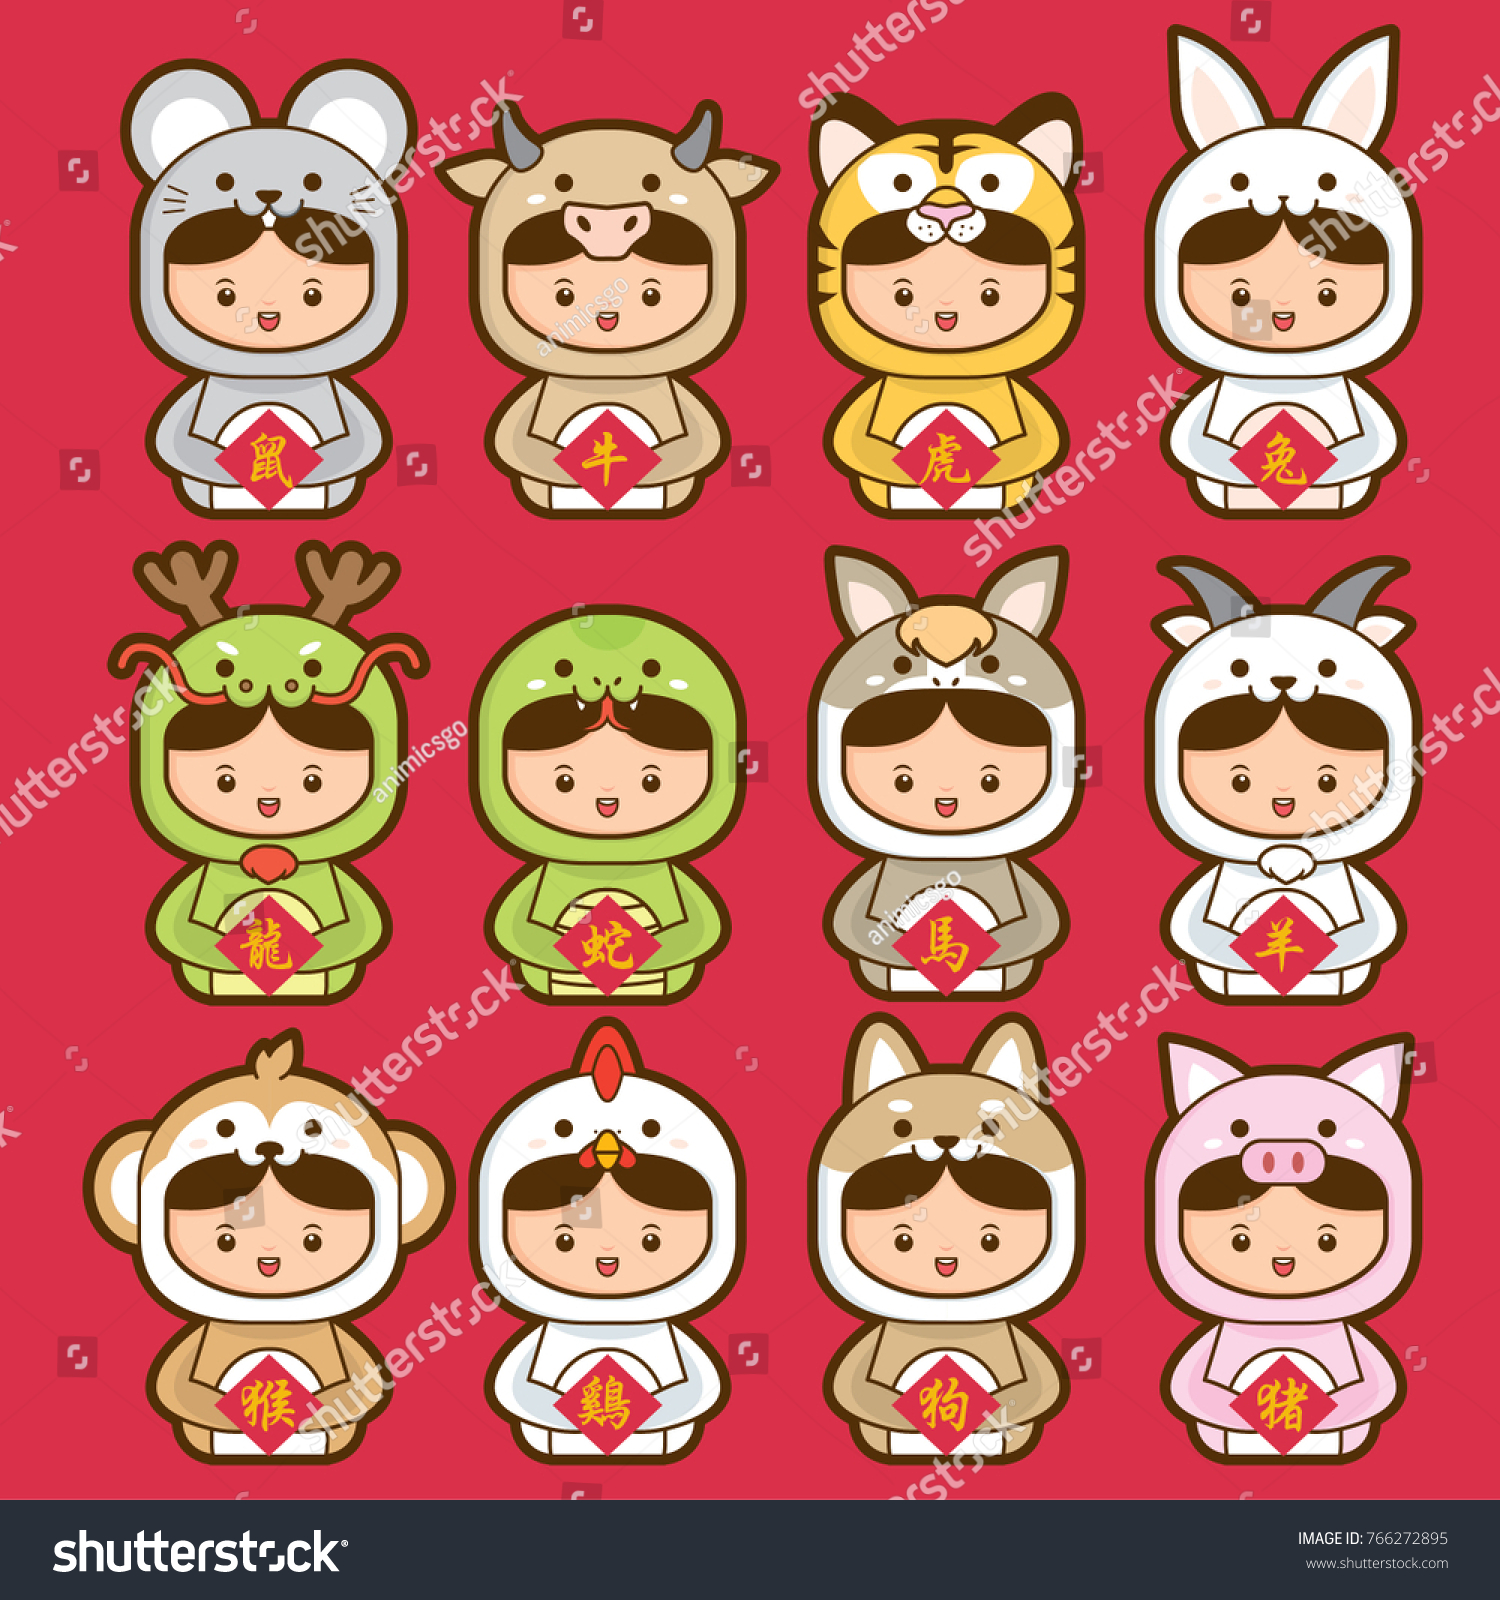 SVG of 12 chinese zodiac, icon set (Chinese Translation: 12 Chinese zodiac signs: rat, ox, tiger, rabbit, dragon, snake, horse, sheep, monkey, rooster, dog and pig) svg